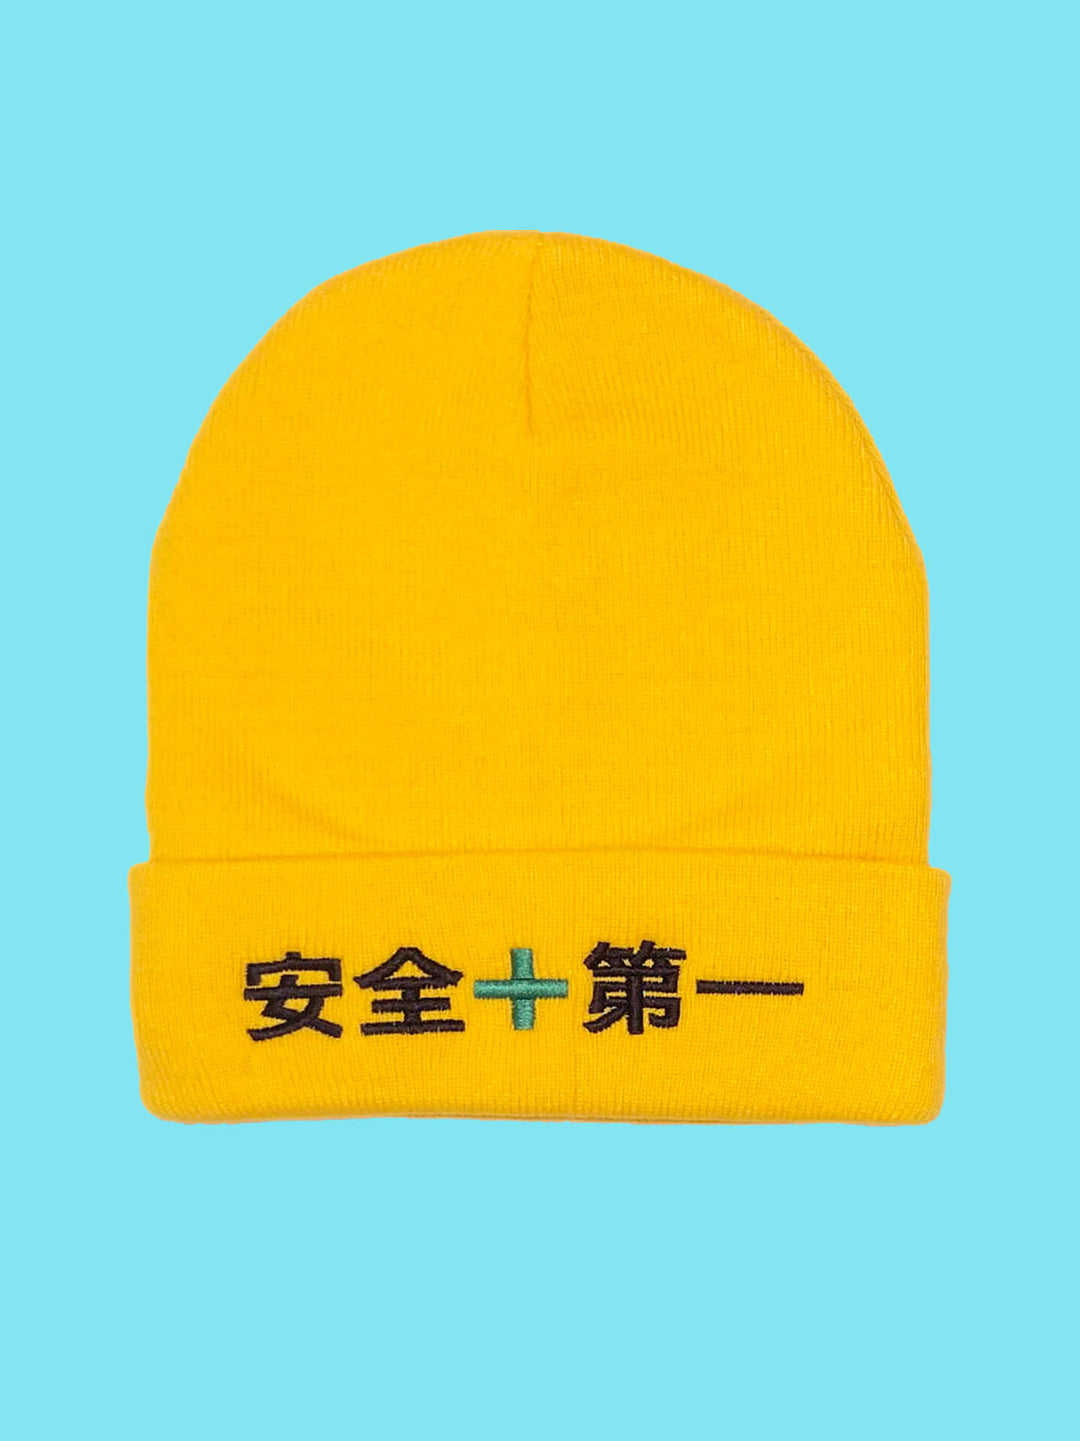 Japanese construction worker beanie. Says 'safety first' in Japanese.